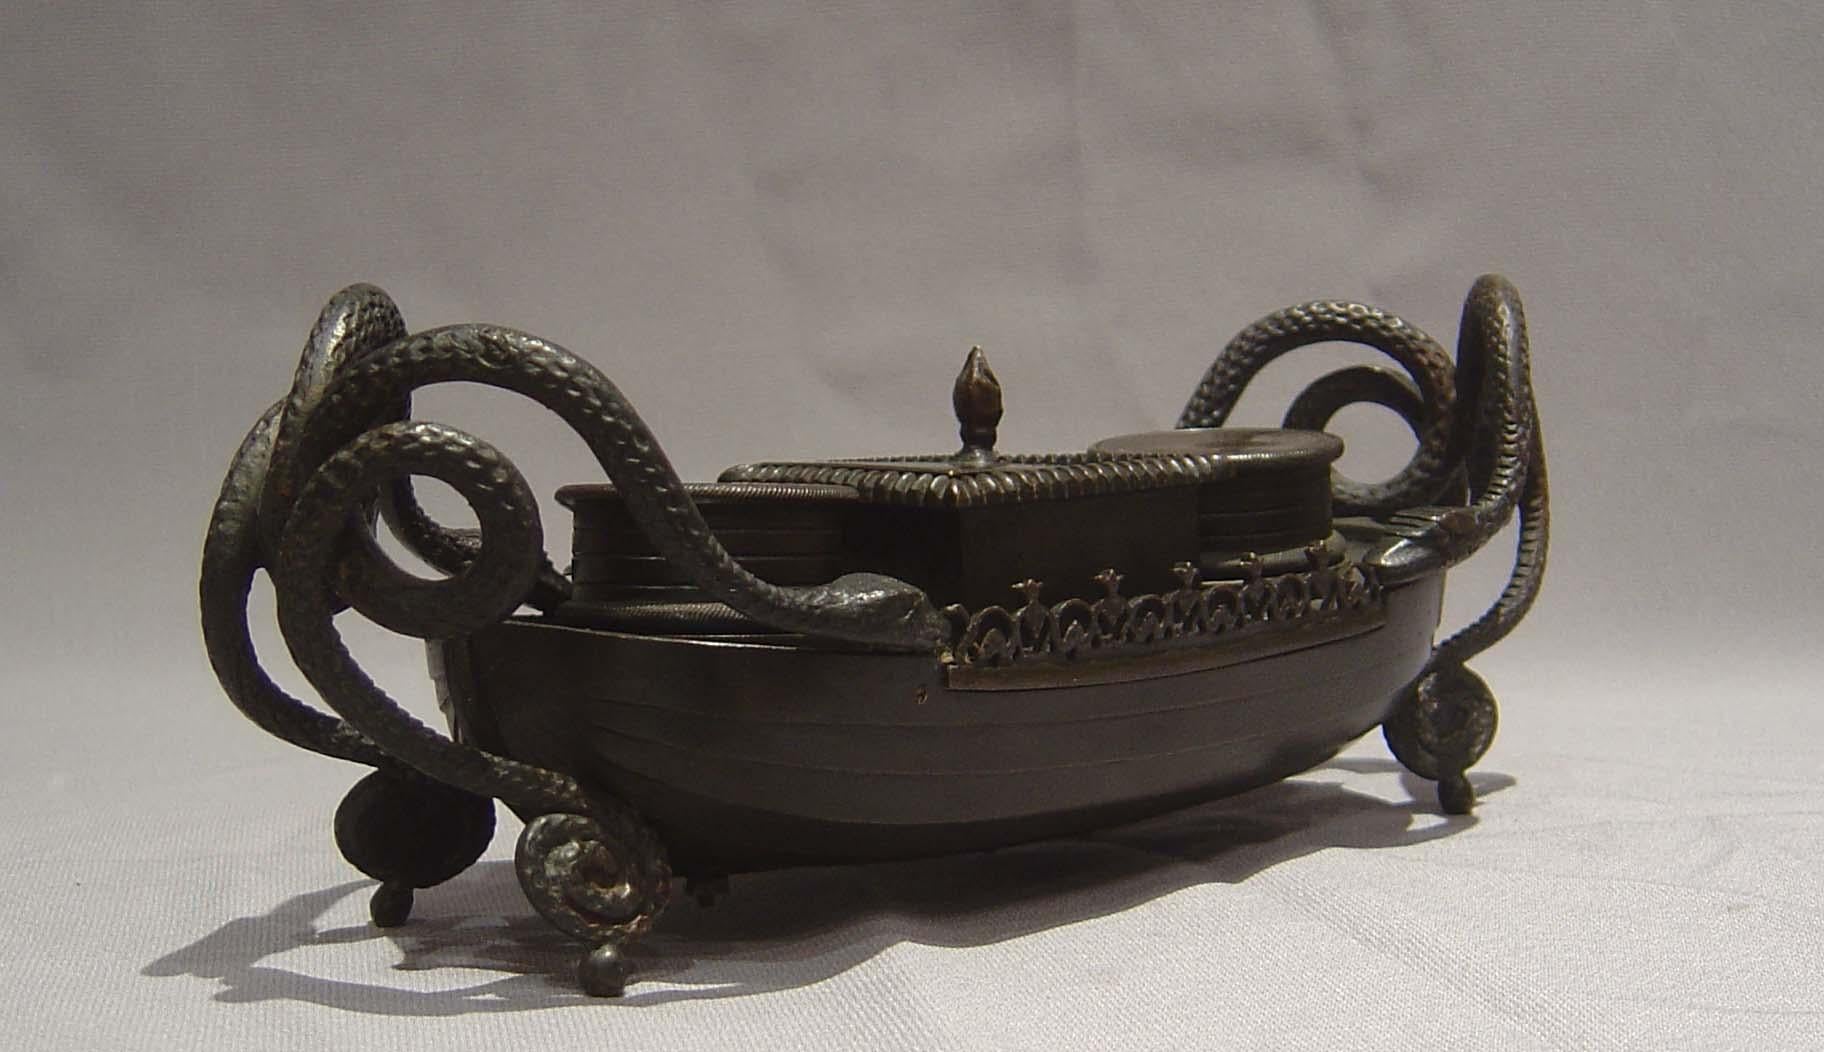 A fine English Regency period patinated bronze inkwell in the shape of a long ship. The main body of the inkwell is in the form of a ship and in a form of shipbuilding known as clinker built where the planks are not laid edge to edge but where the